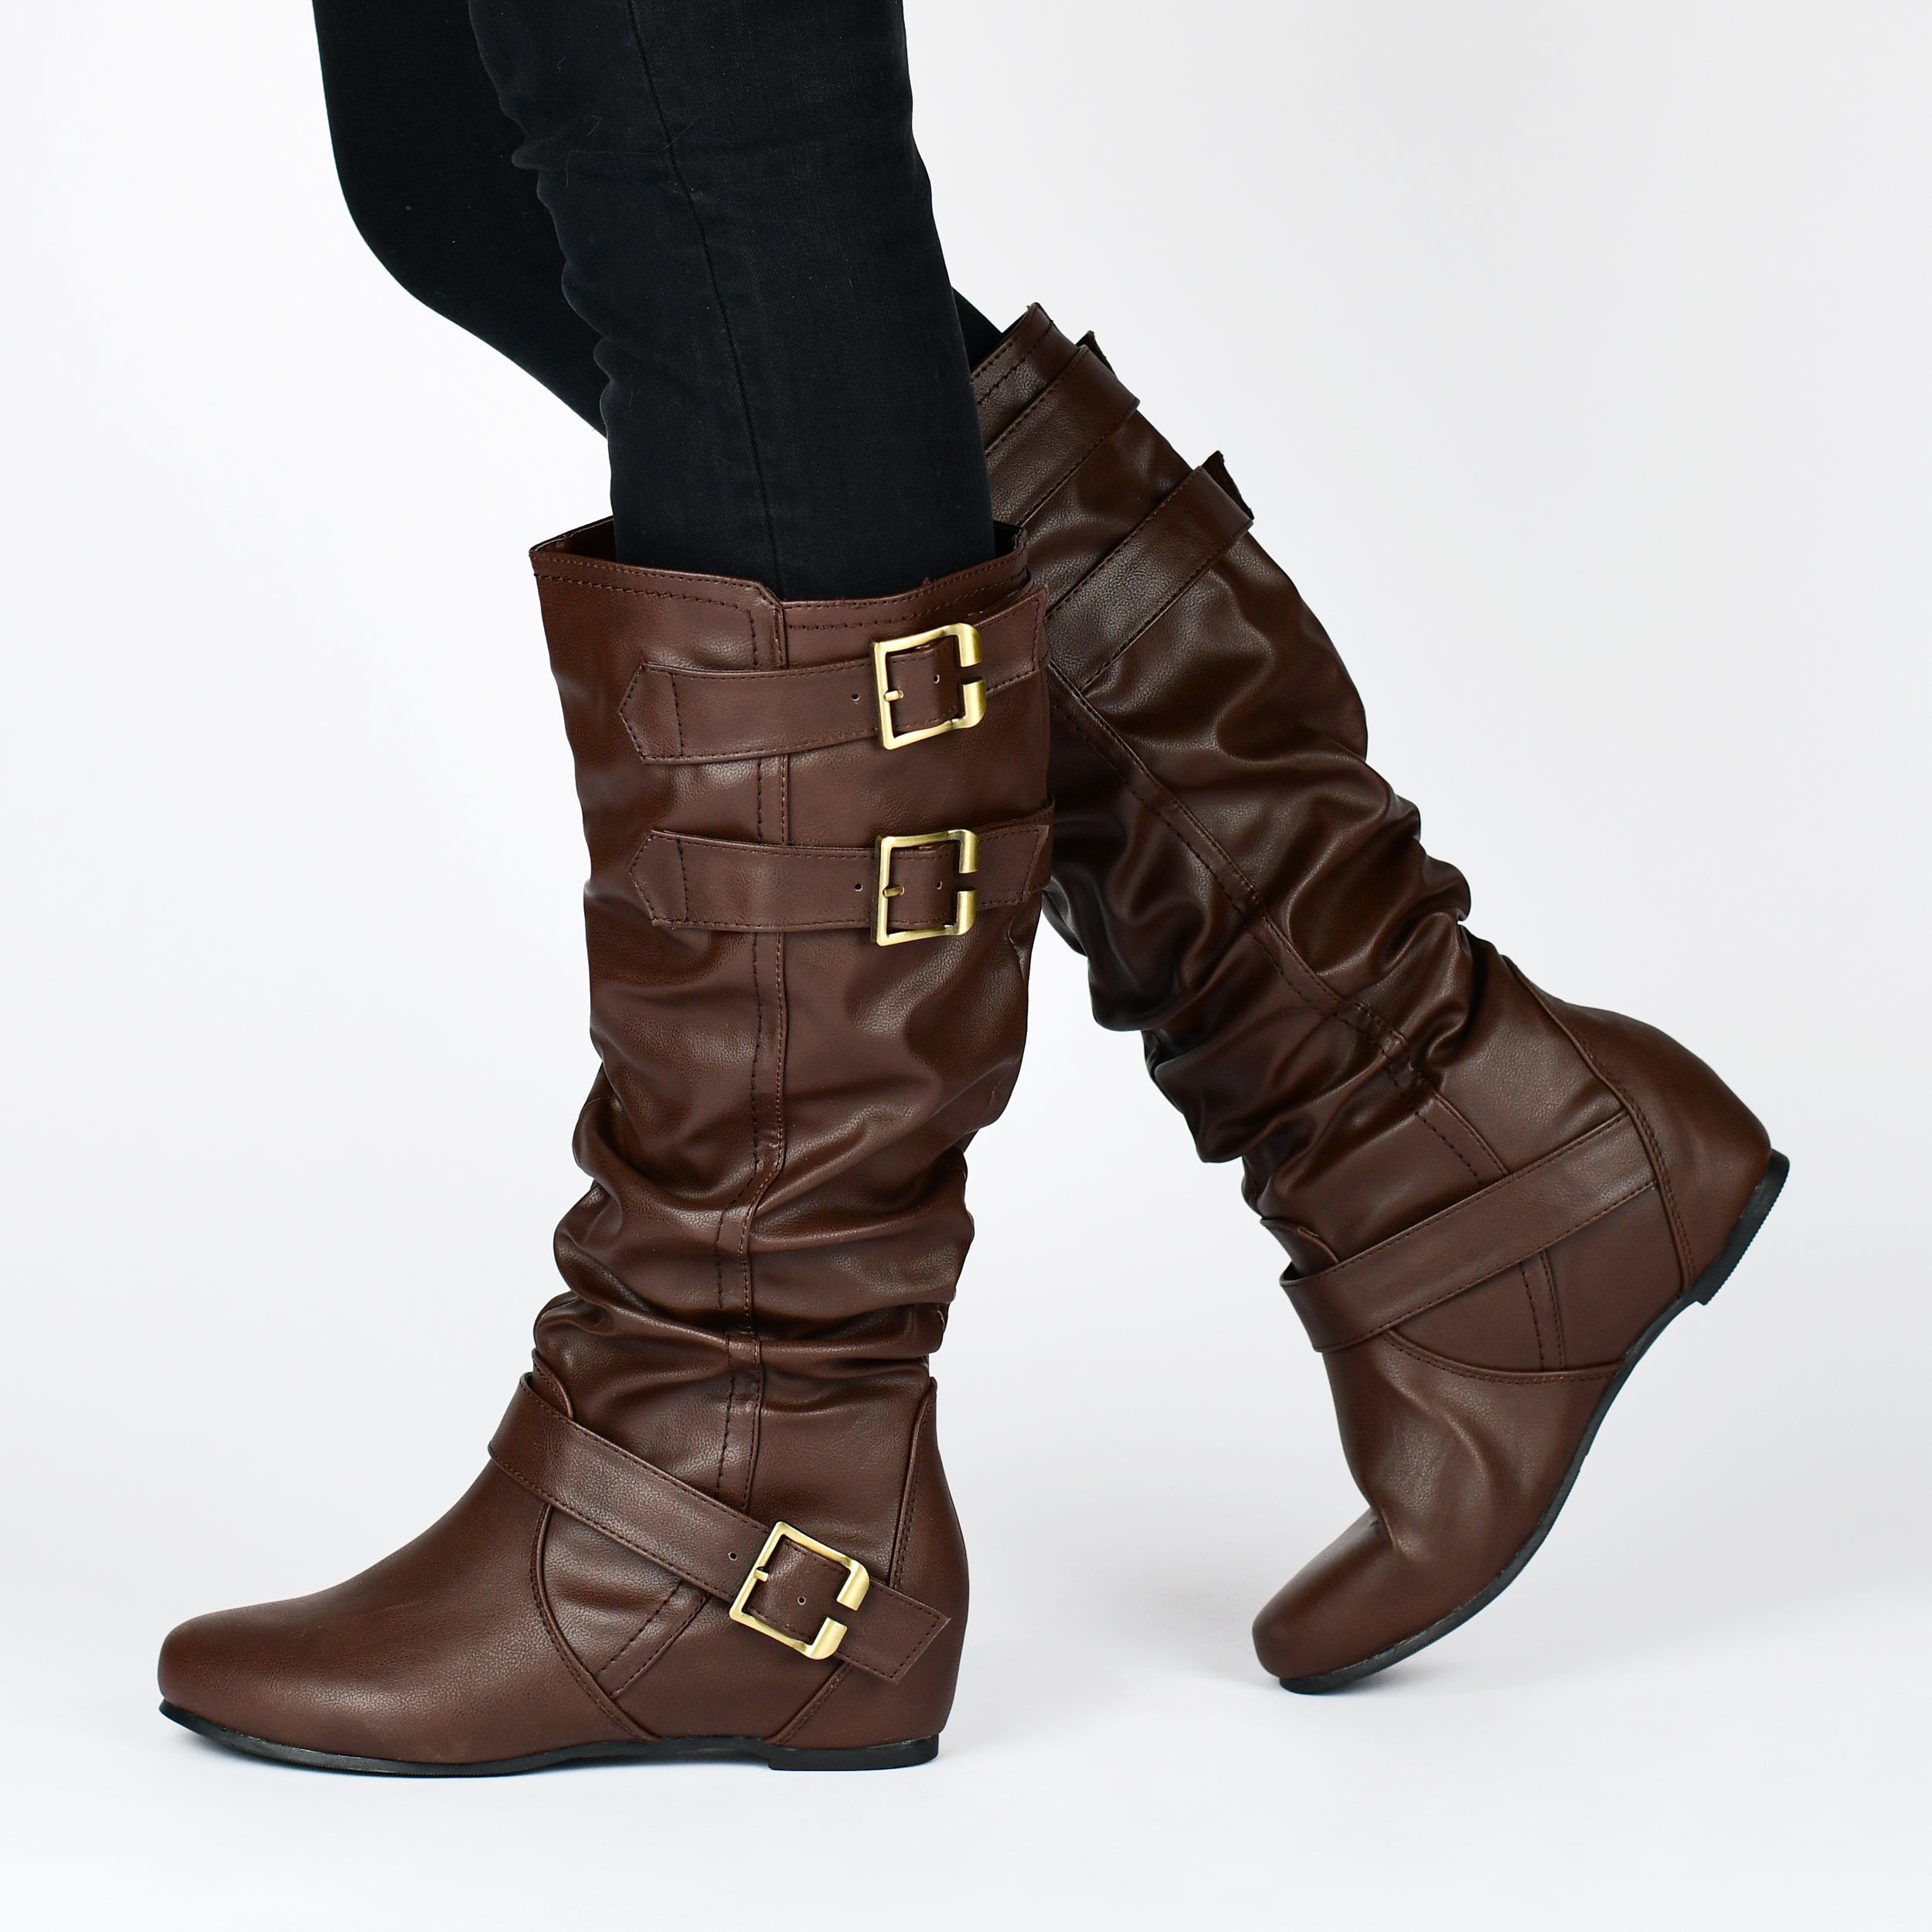 Tiffany Boot | Women's Slouchy Boots | Journee Collection